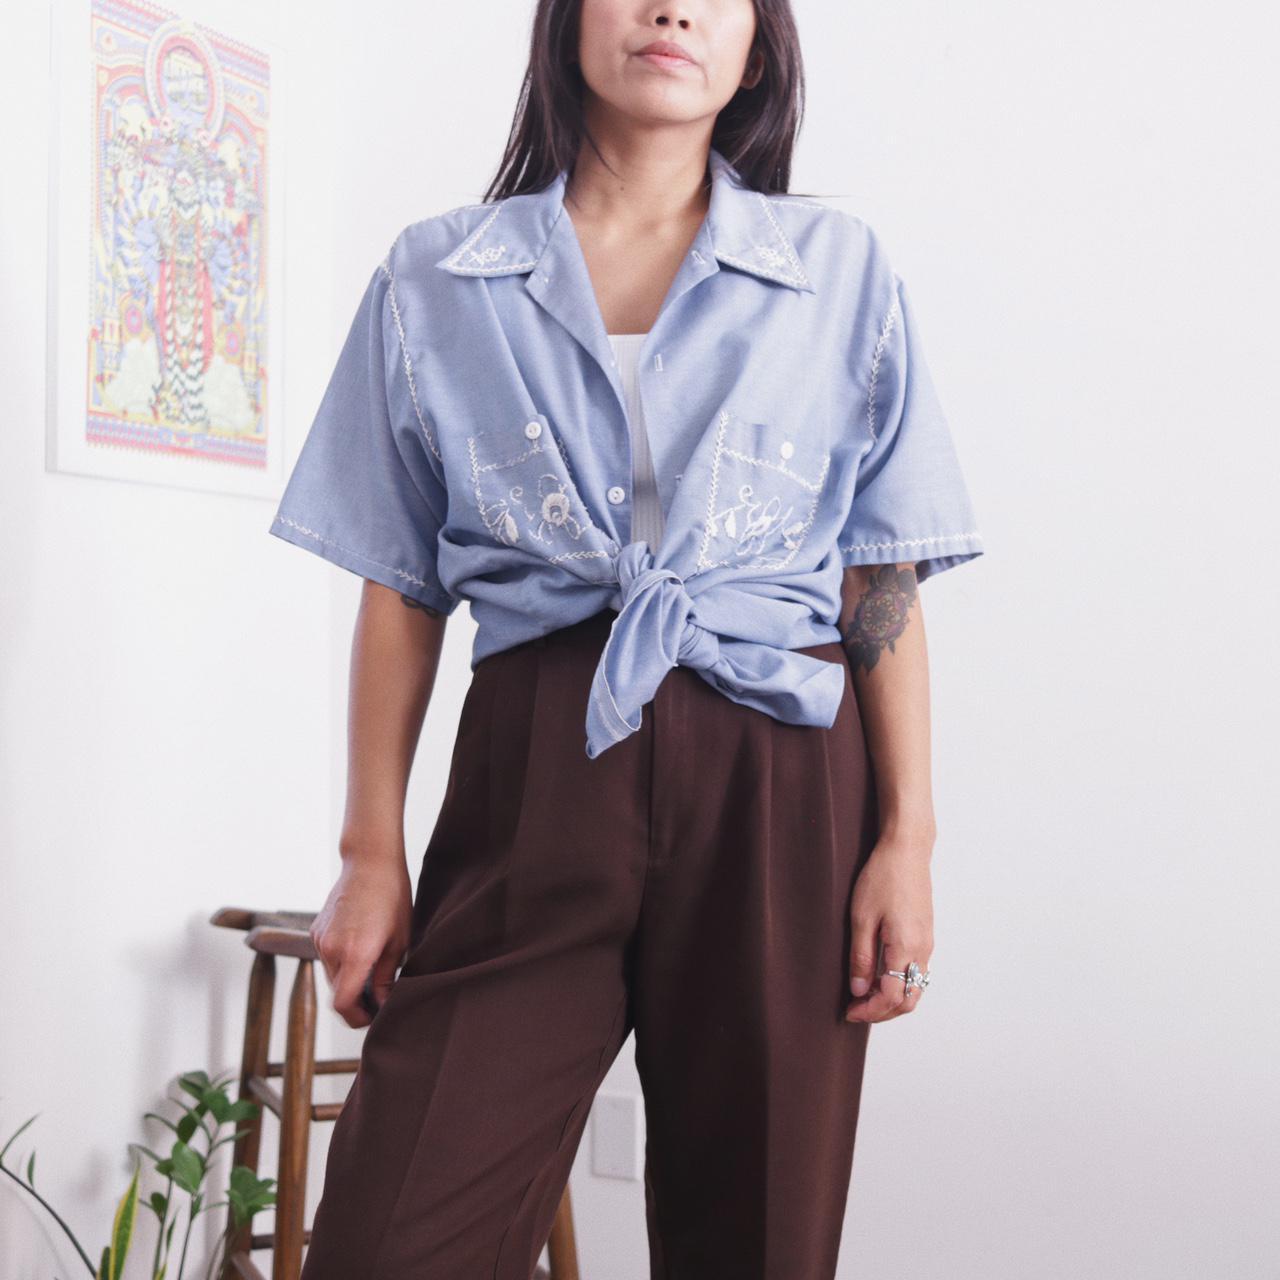 Product Image 2 - vintage 70s chambray shirt

DESCRIPTION
western style